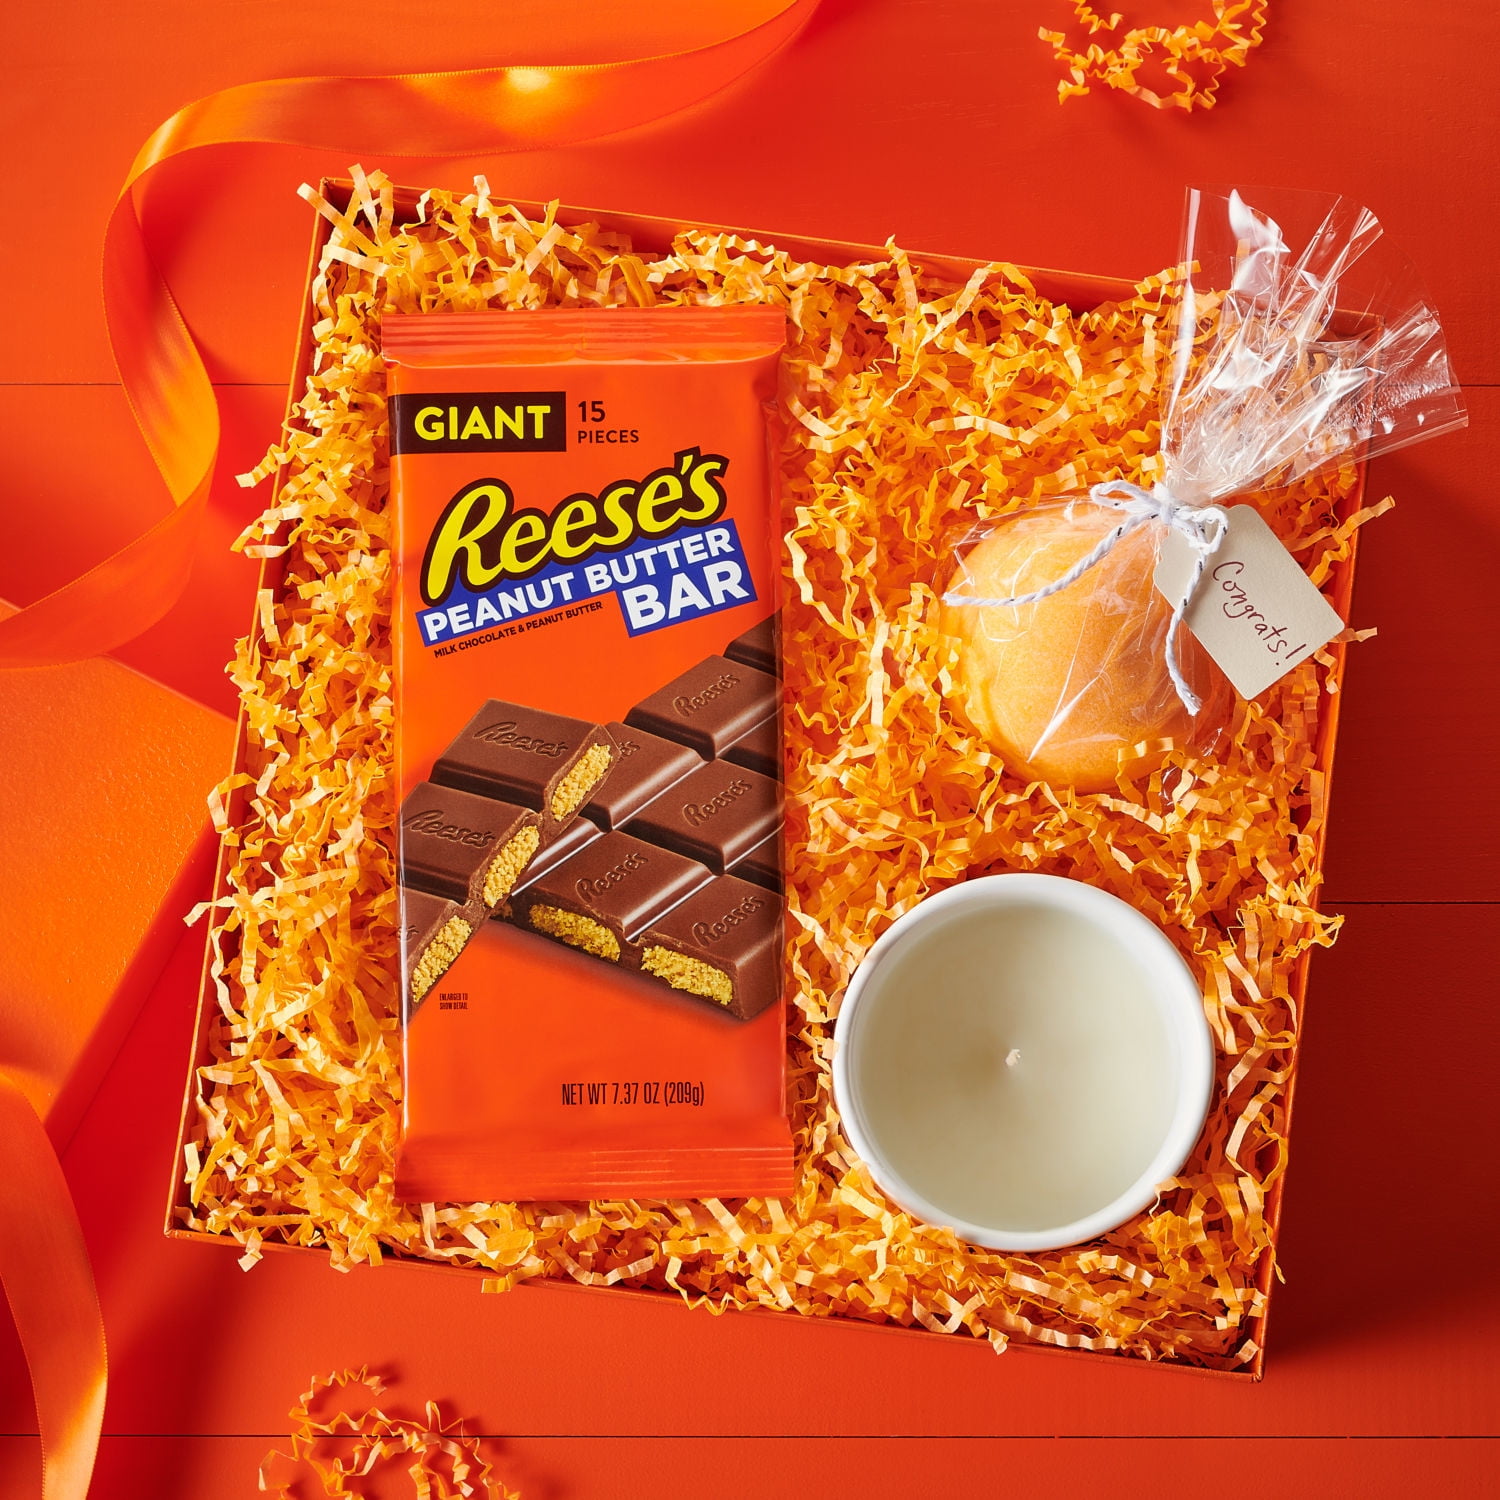 Reese's Milk Chocolate Filled with Peanut Butter Giant Candy Bar - 7.37 oz